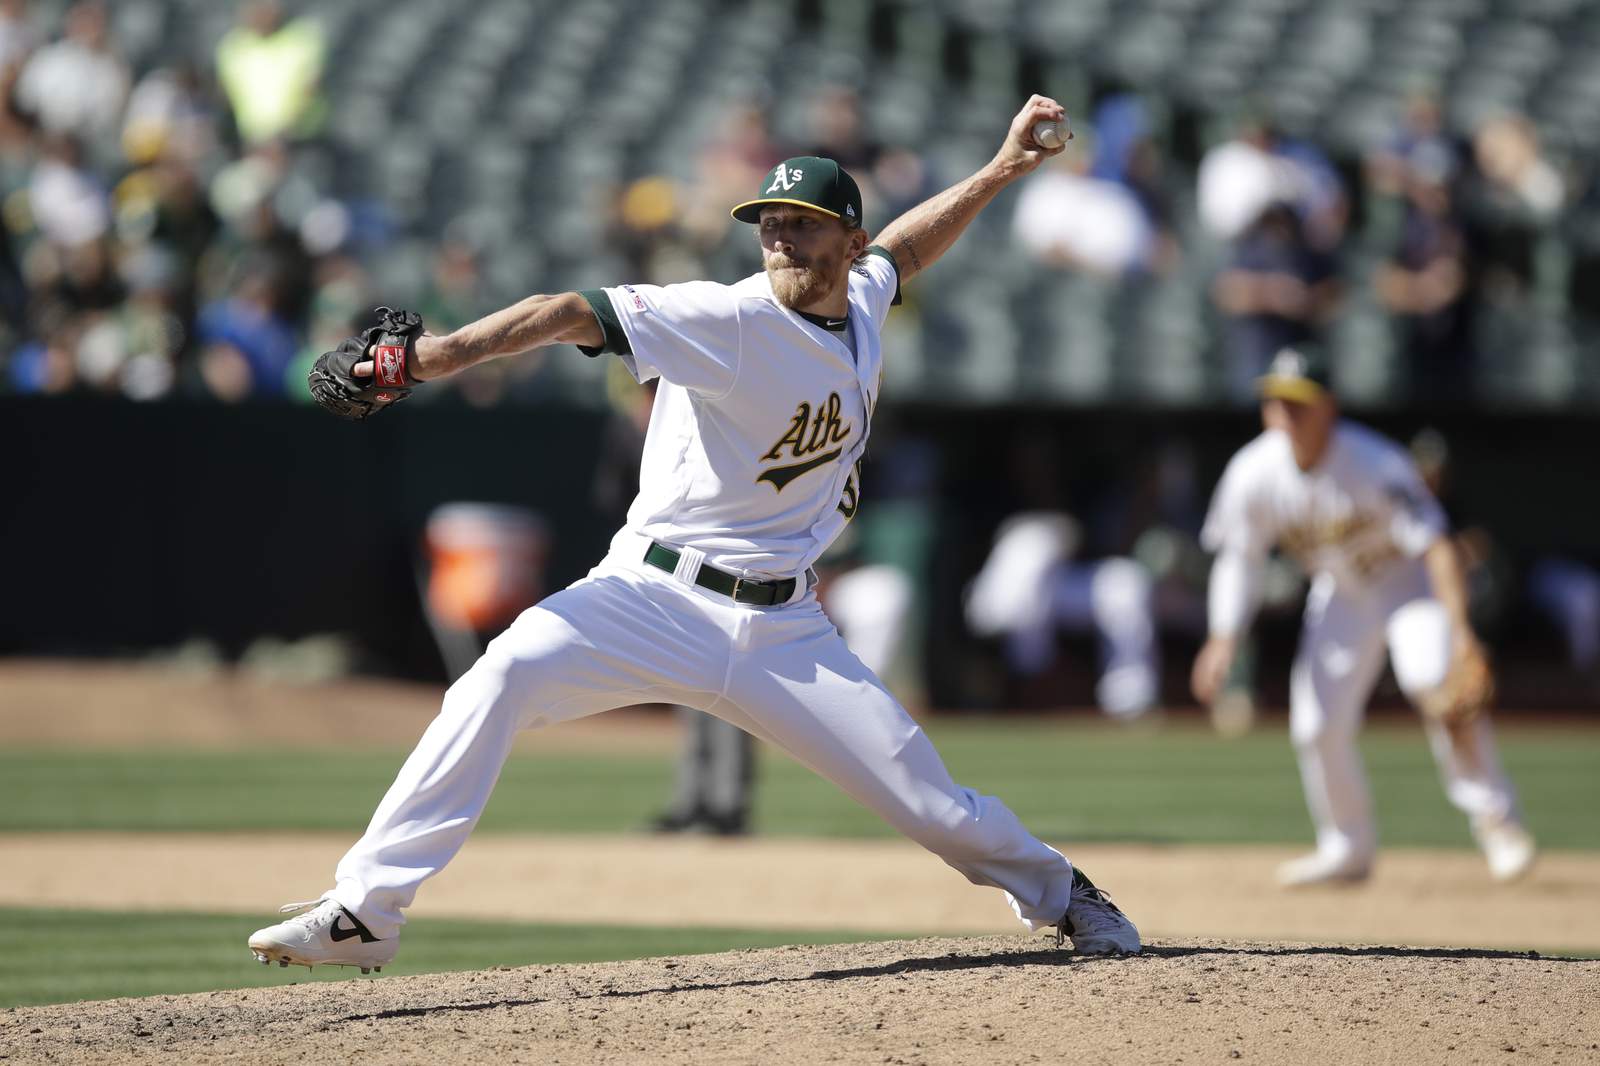 A's lefty Diekman questions whether there will be a season